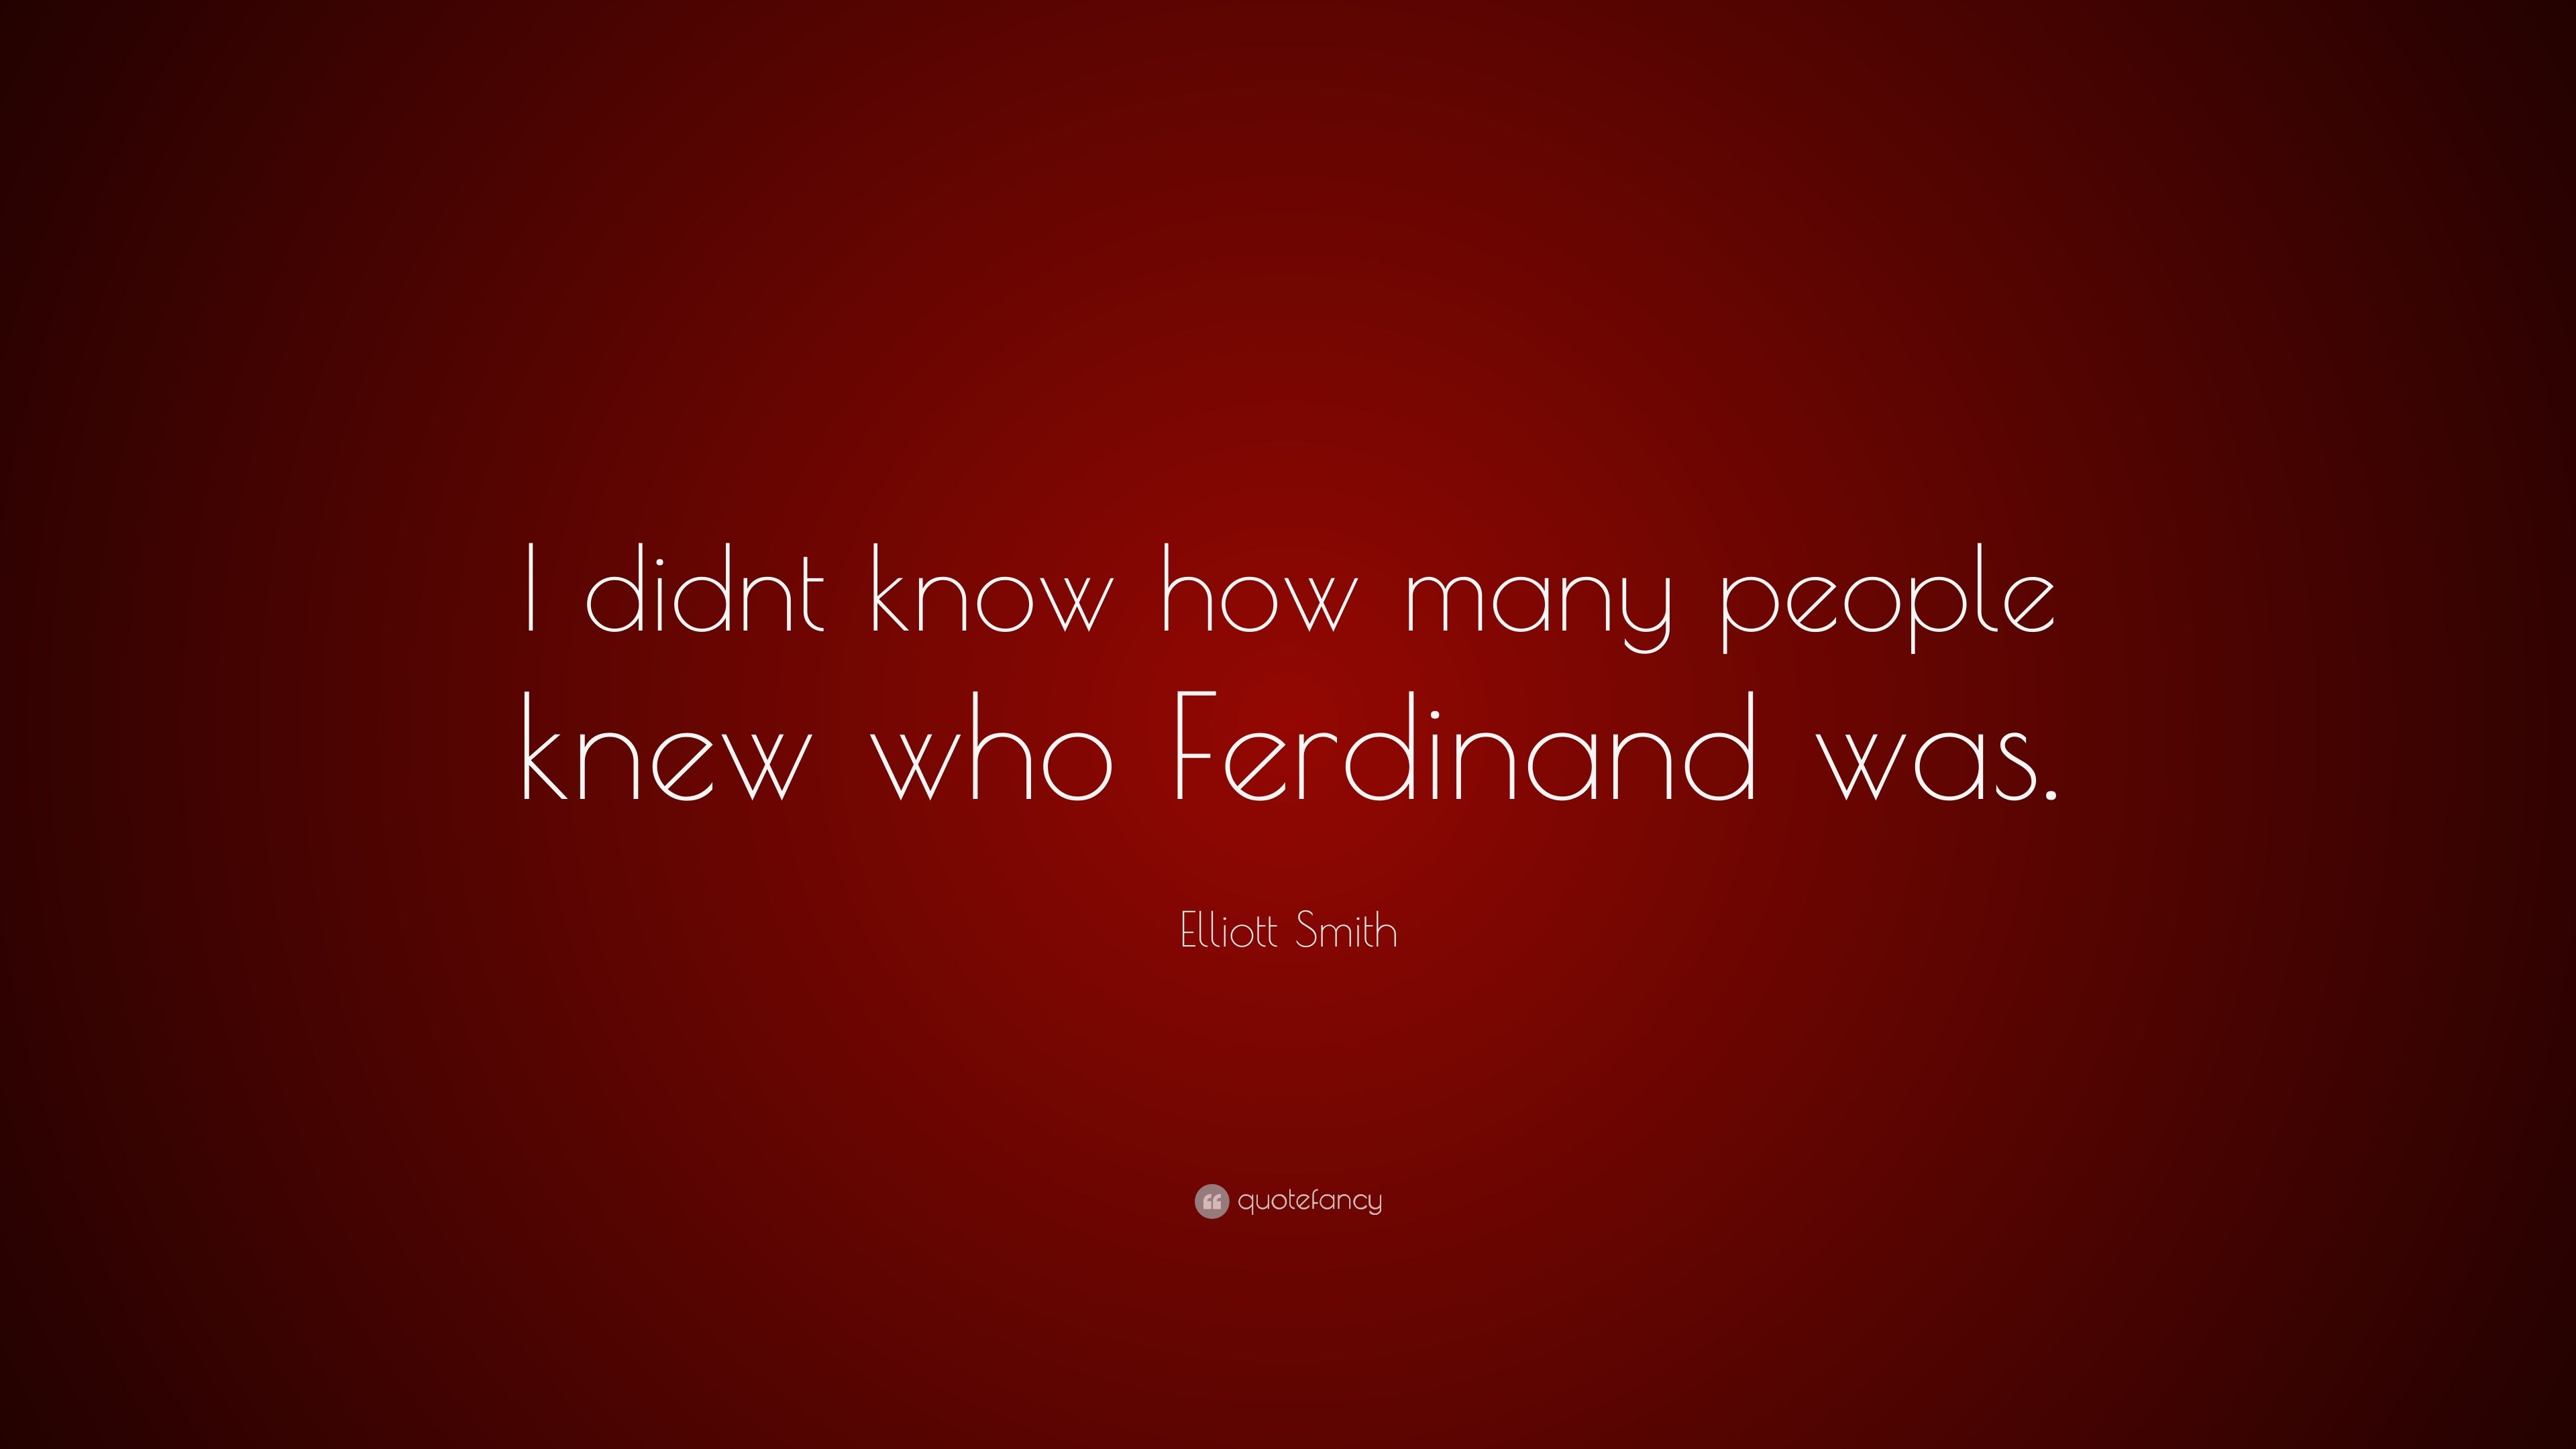 Elliott Smith Quote: “I didnt know how many people knew who Ferdinand was.” (7 wallpaper)